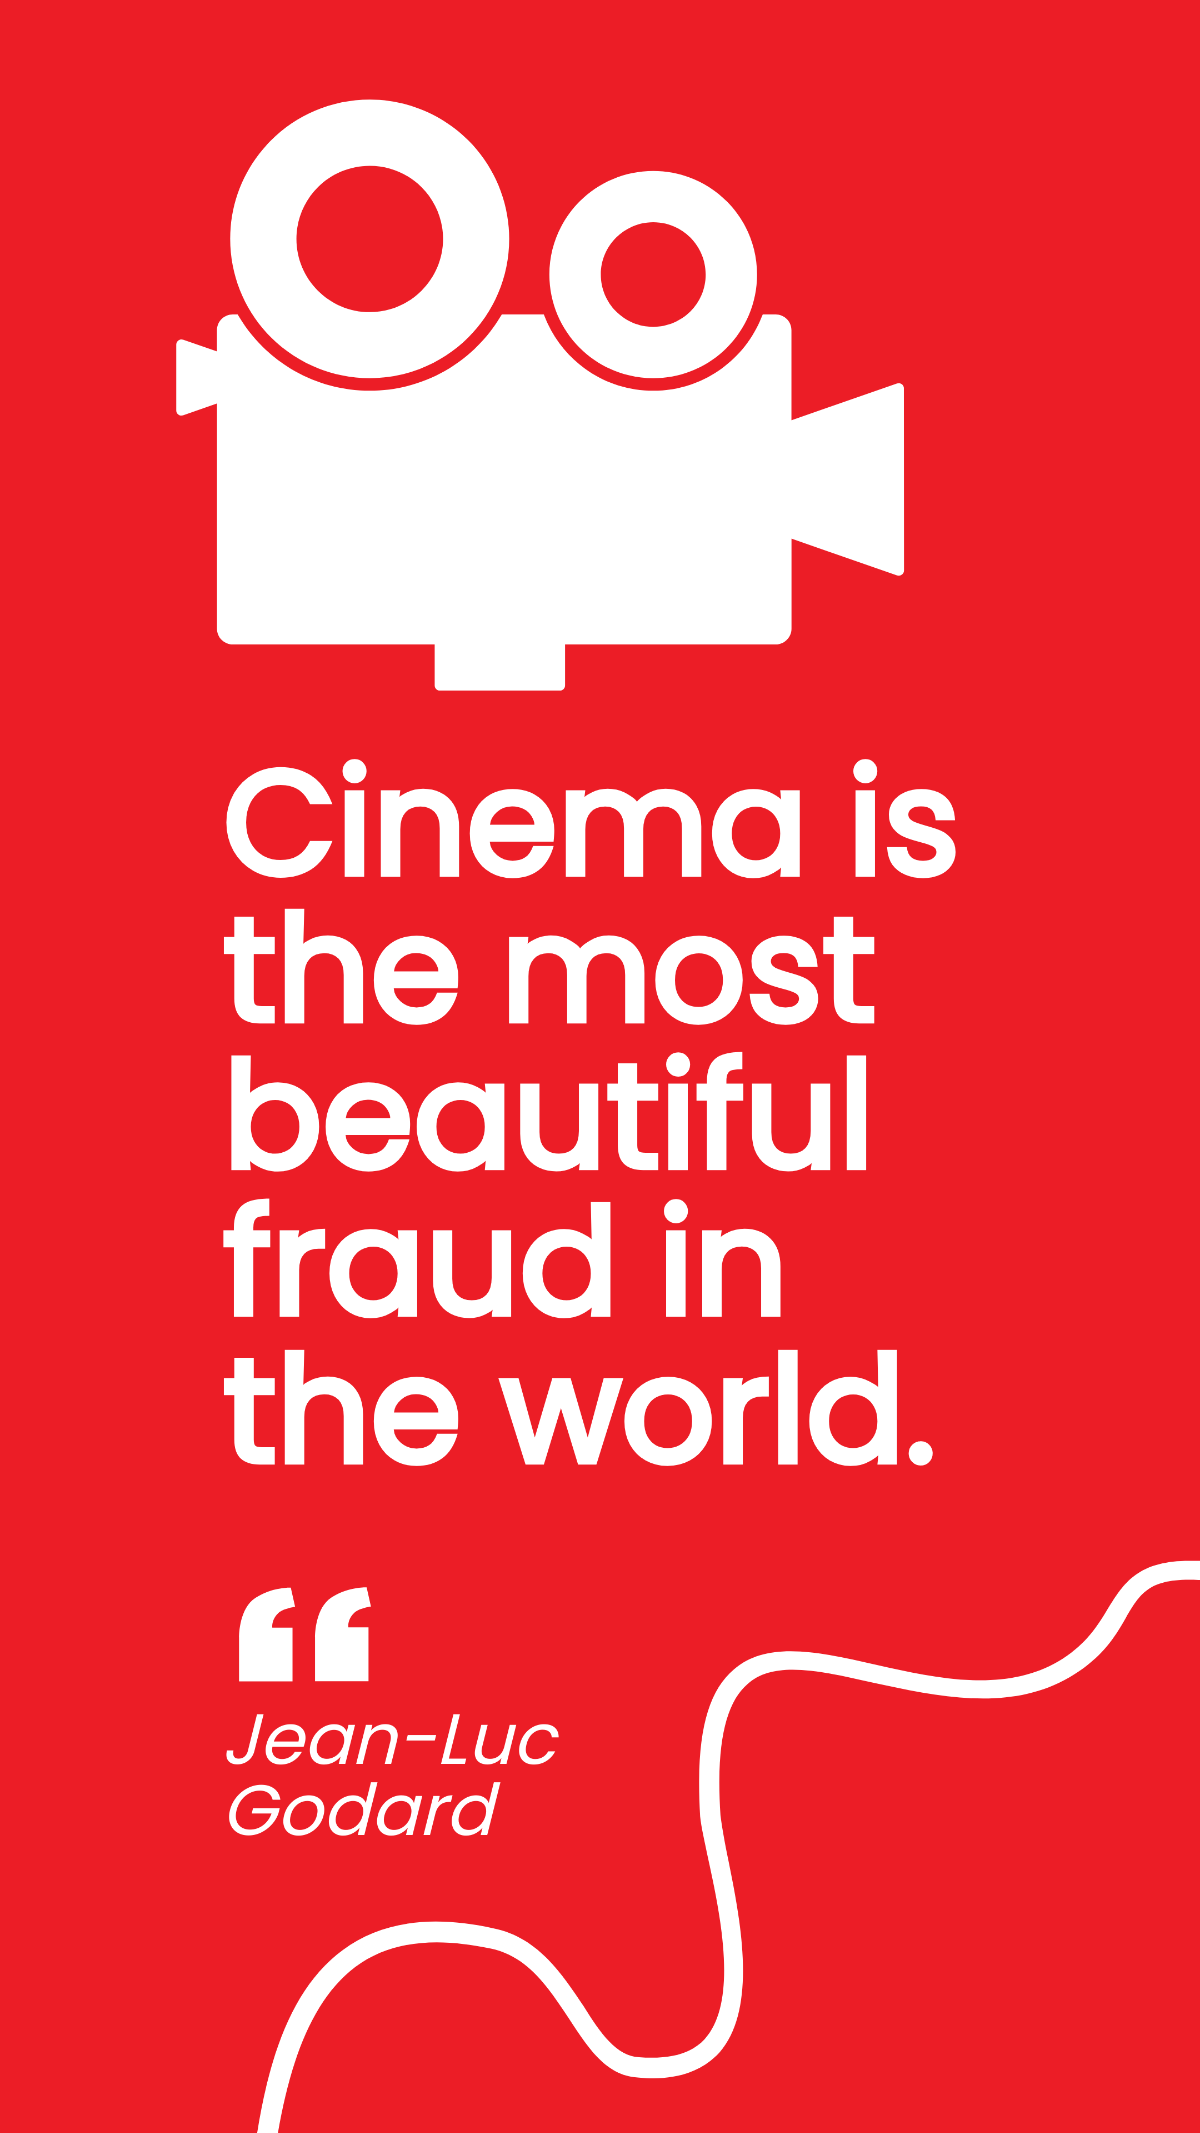 Jean-Luc Godard - Cinema is the most beautiful fraud in the world. Template